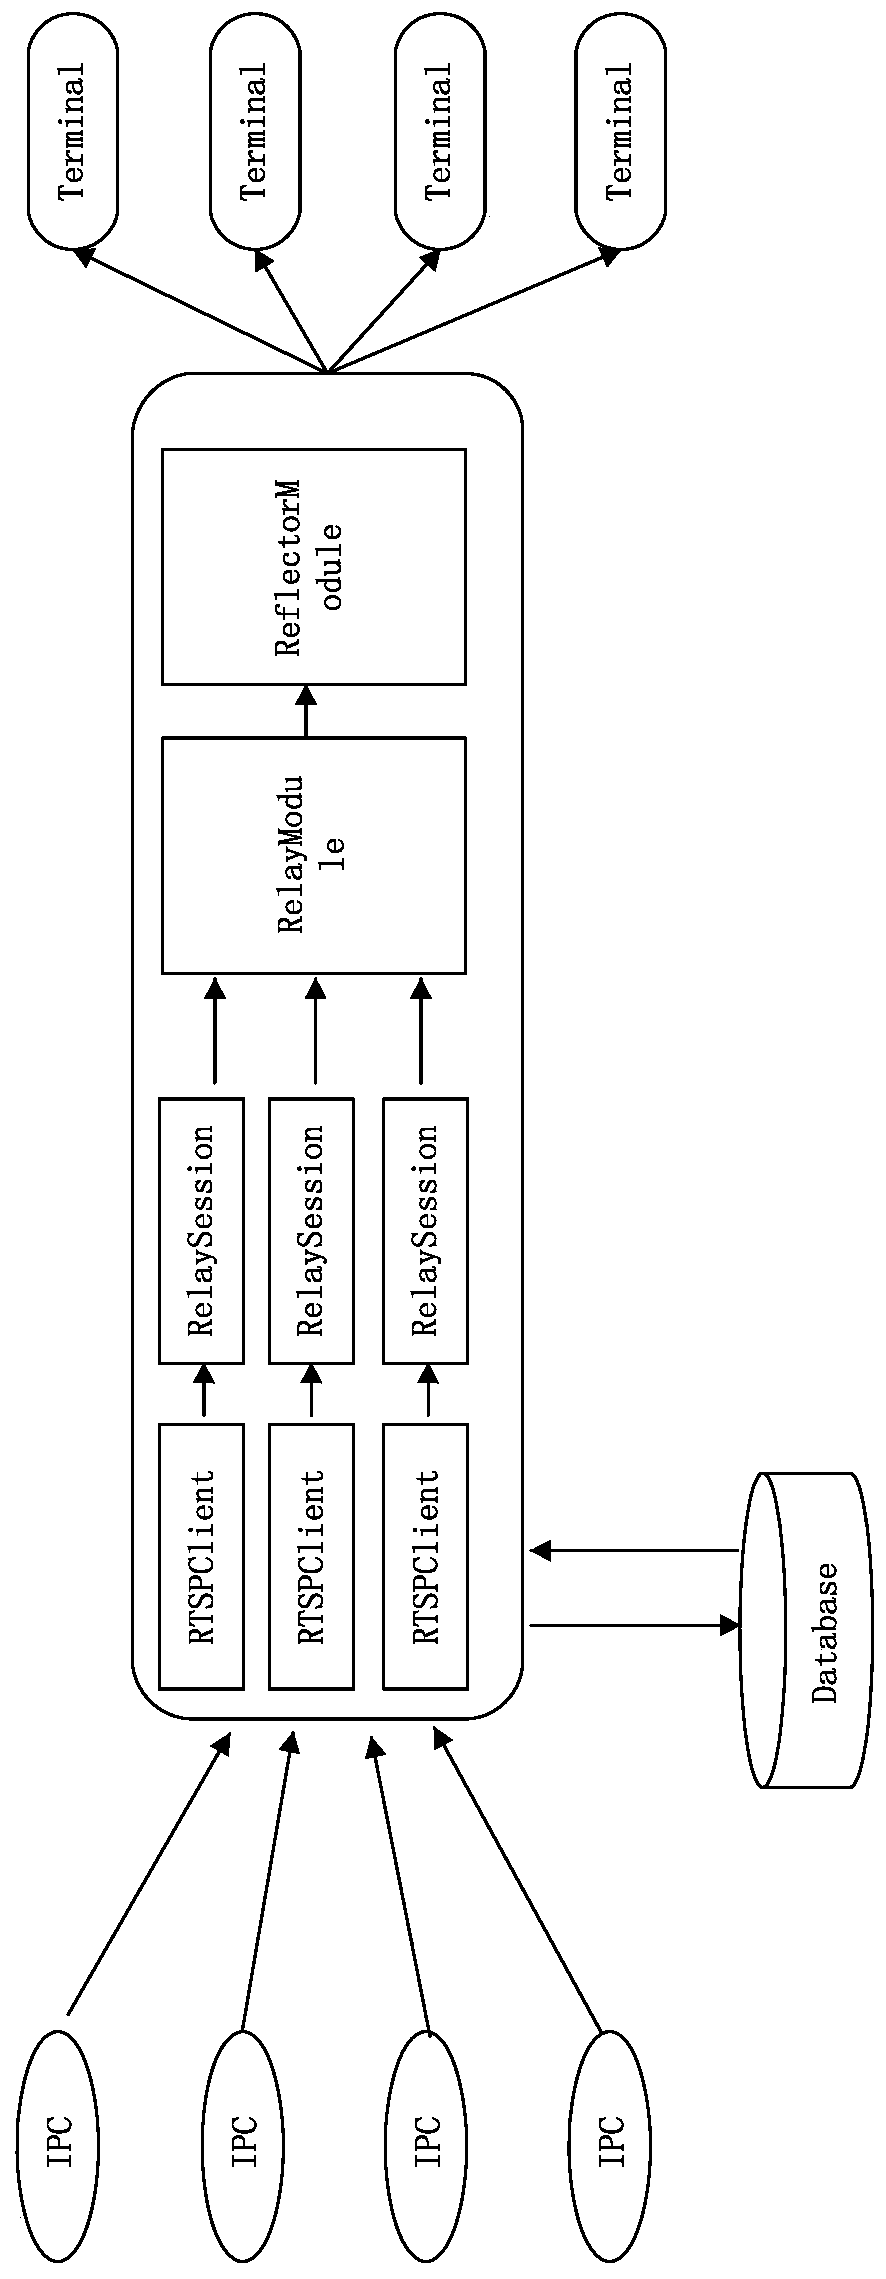 A method for relaying audio and video data streams in tcp mode based on dss time-sharing system